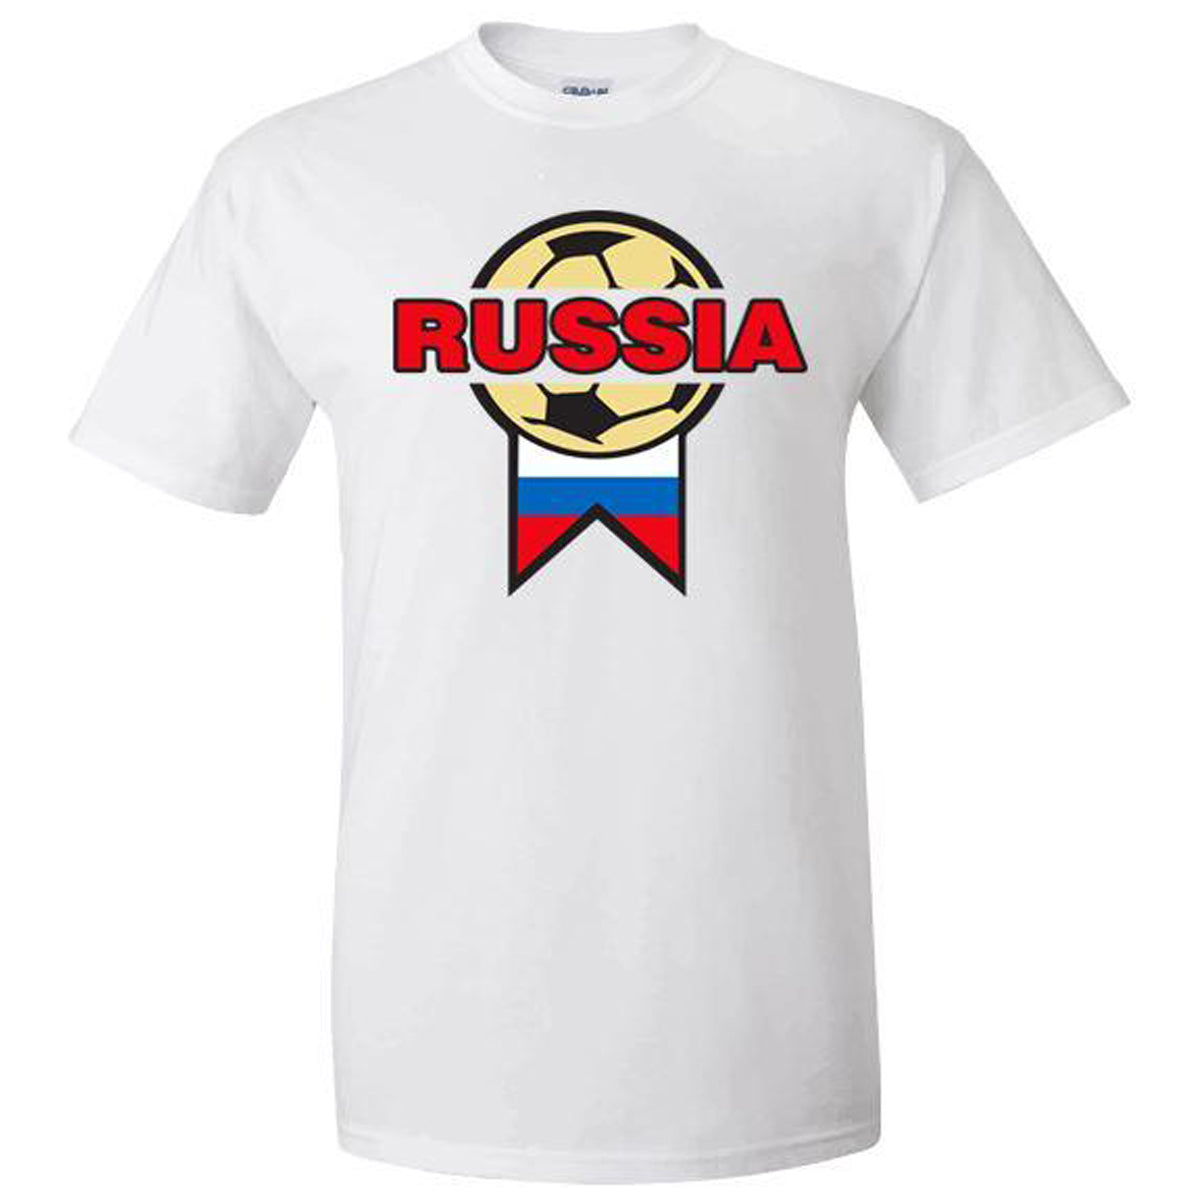 Russia World Cup 2022 Spirit Tee | Various Designs Shirt 411 Badge Youth Medium Youth